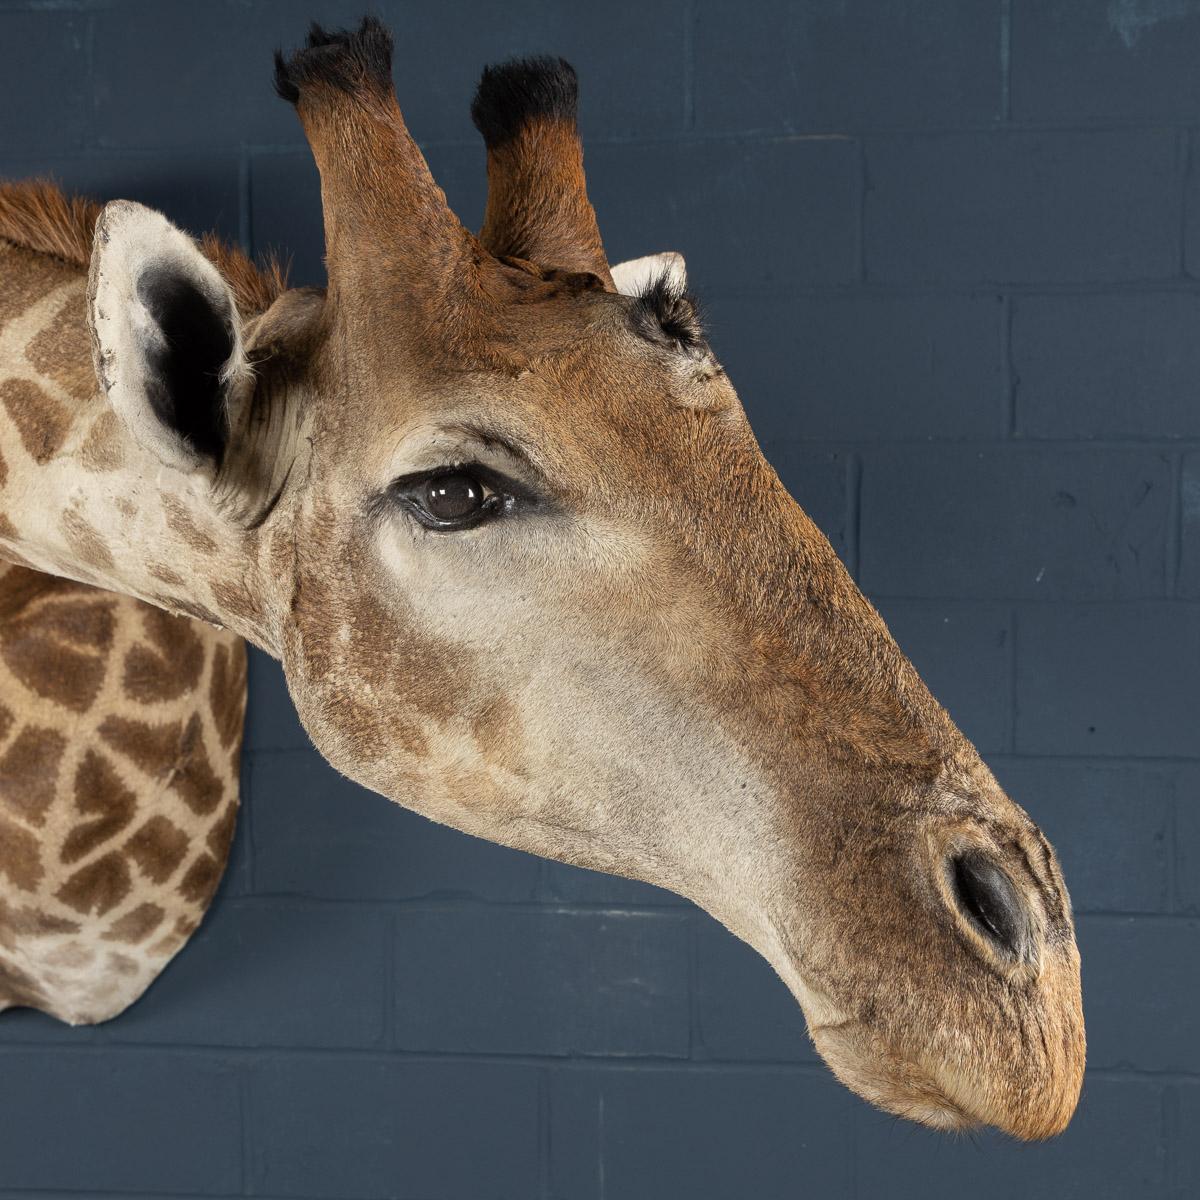 Superb taxidermy study of a giraffe, wall mounted, looking right (or to his left). One of the most unusual mounts ever seen, a fun and quirky addition to any interior.

N.B. This item does not require a cites license to be sold. It will, however,